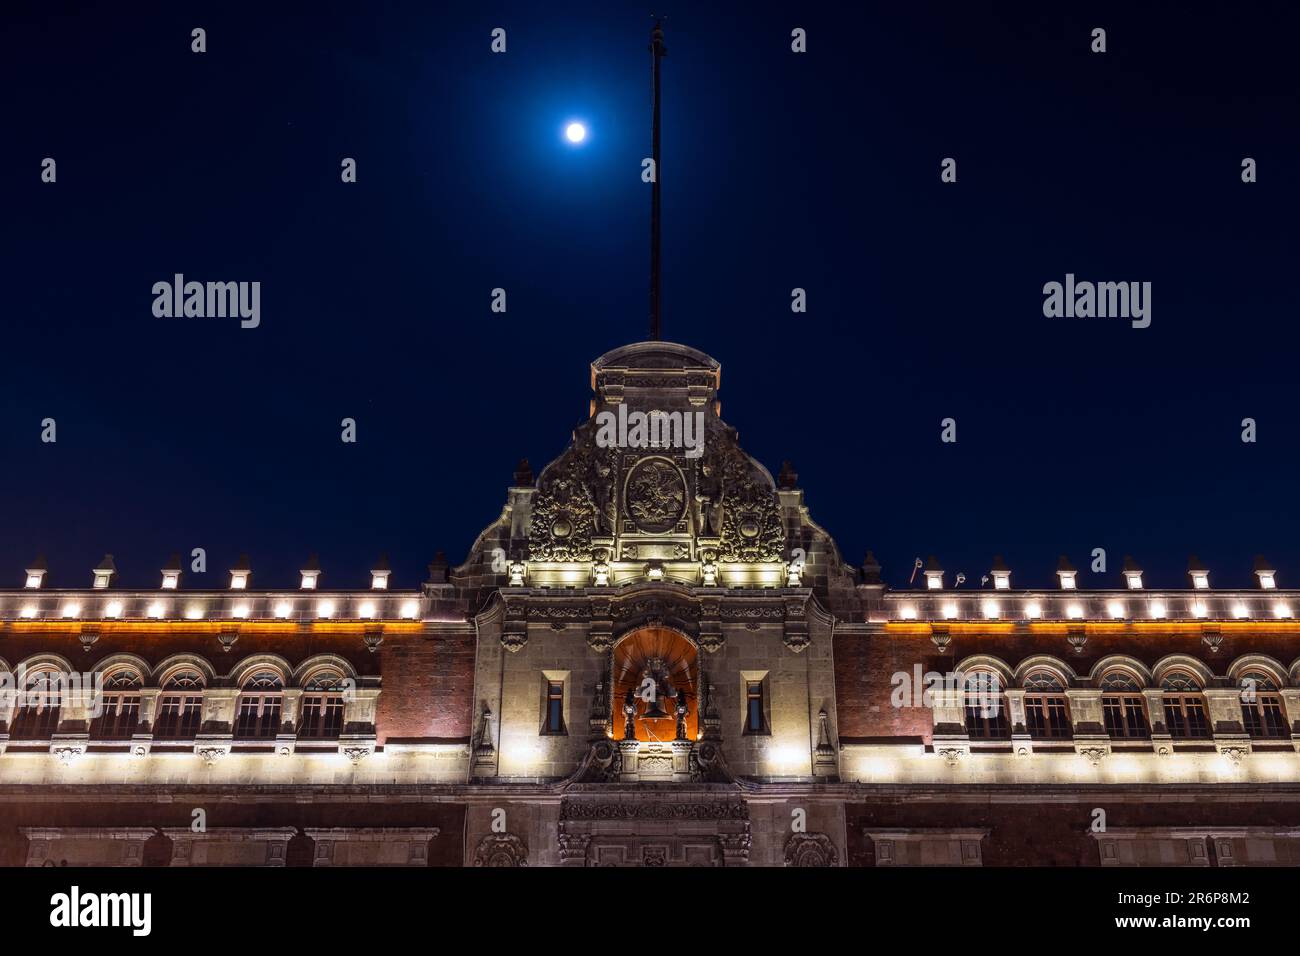 Presidential Palace facade at night with full moon, Mexico City, Mexico. Stock Photo